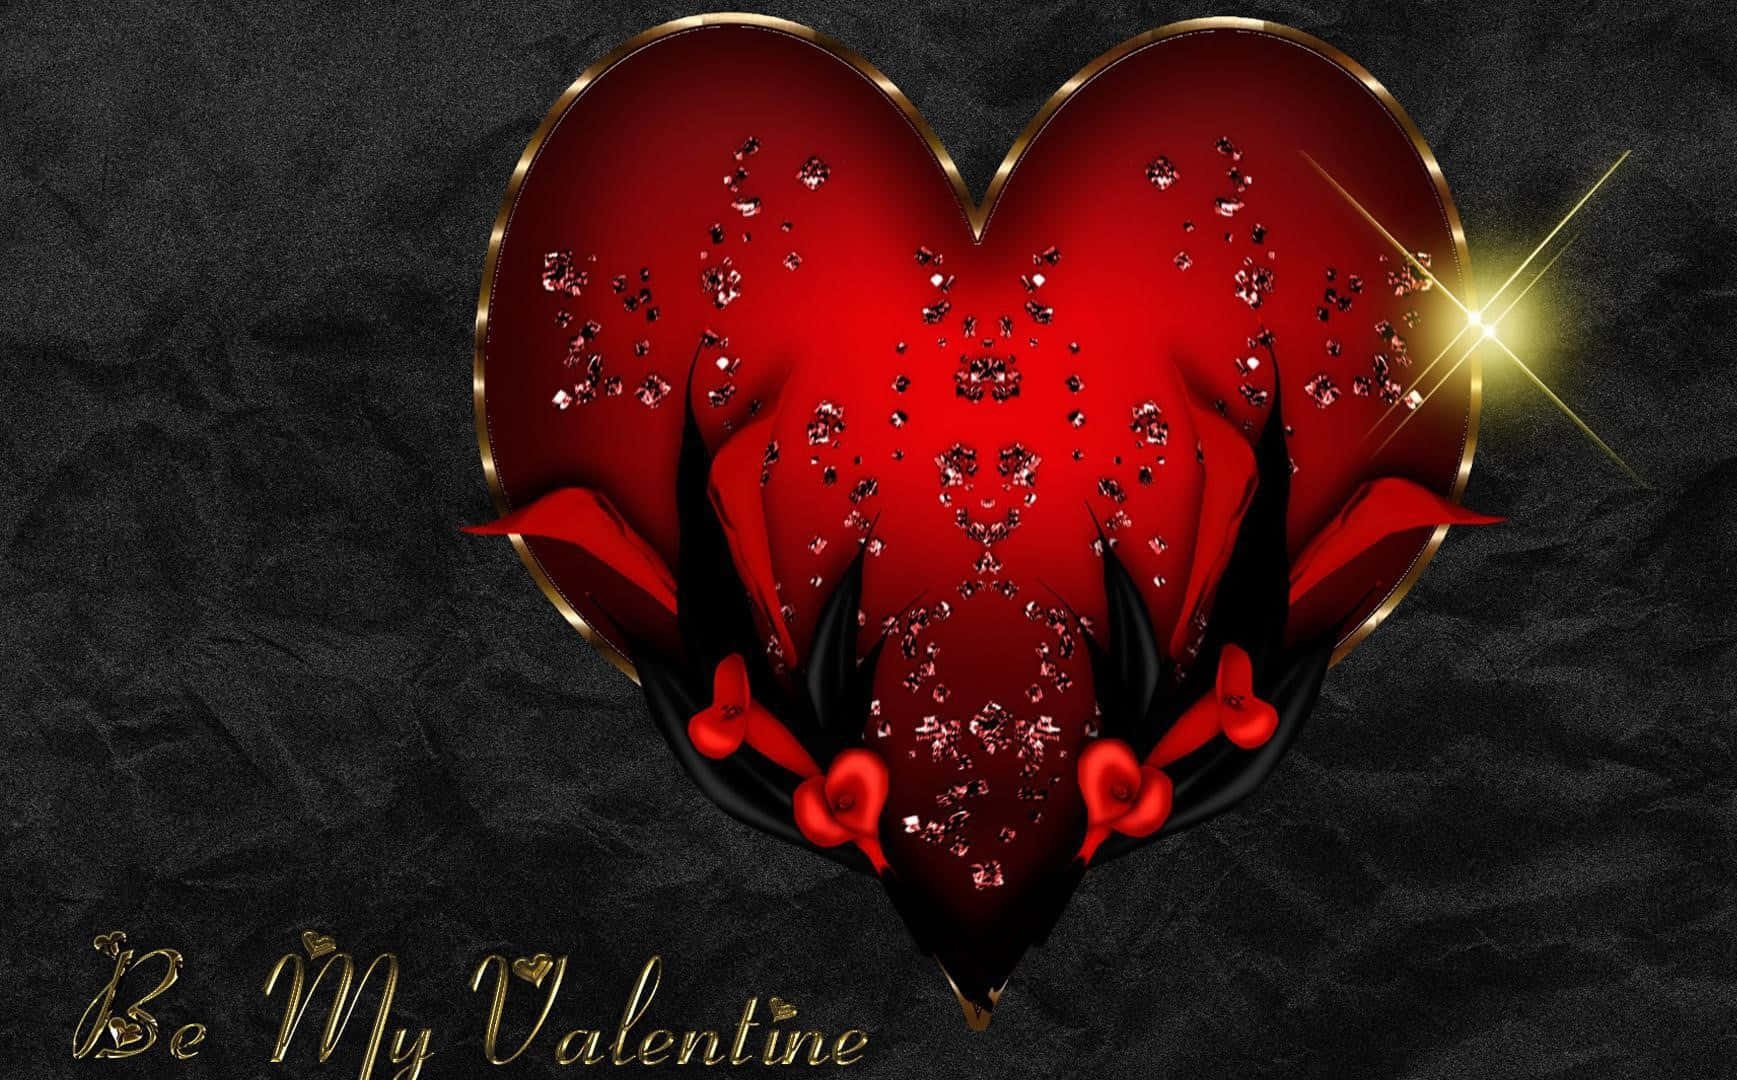 Captivating Red Heart Background